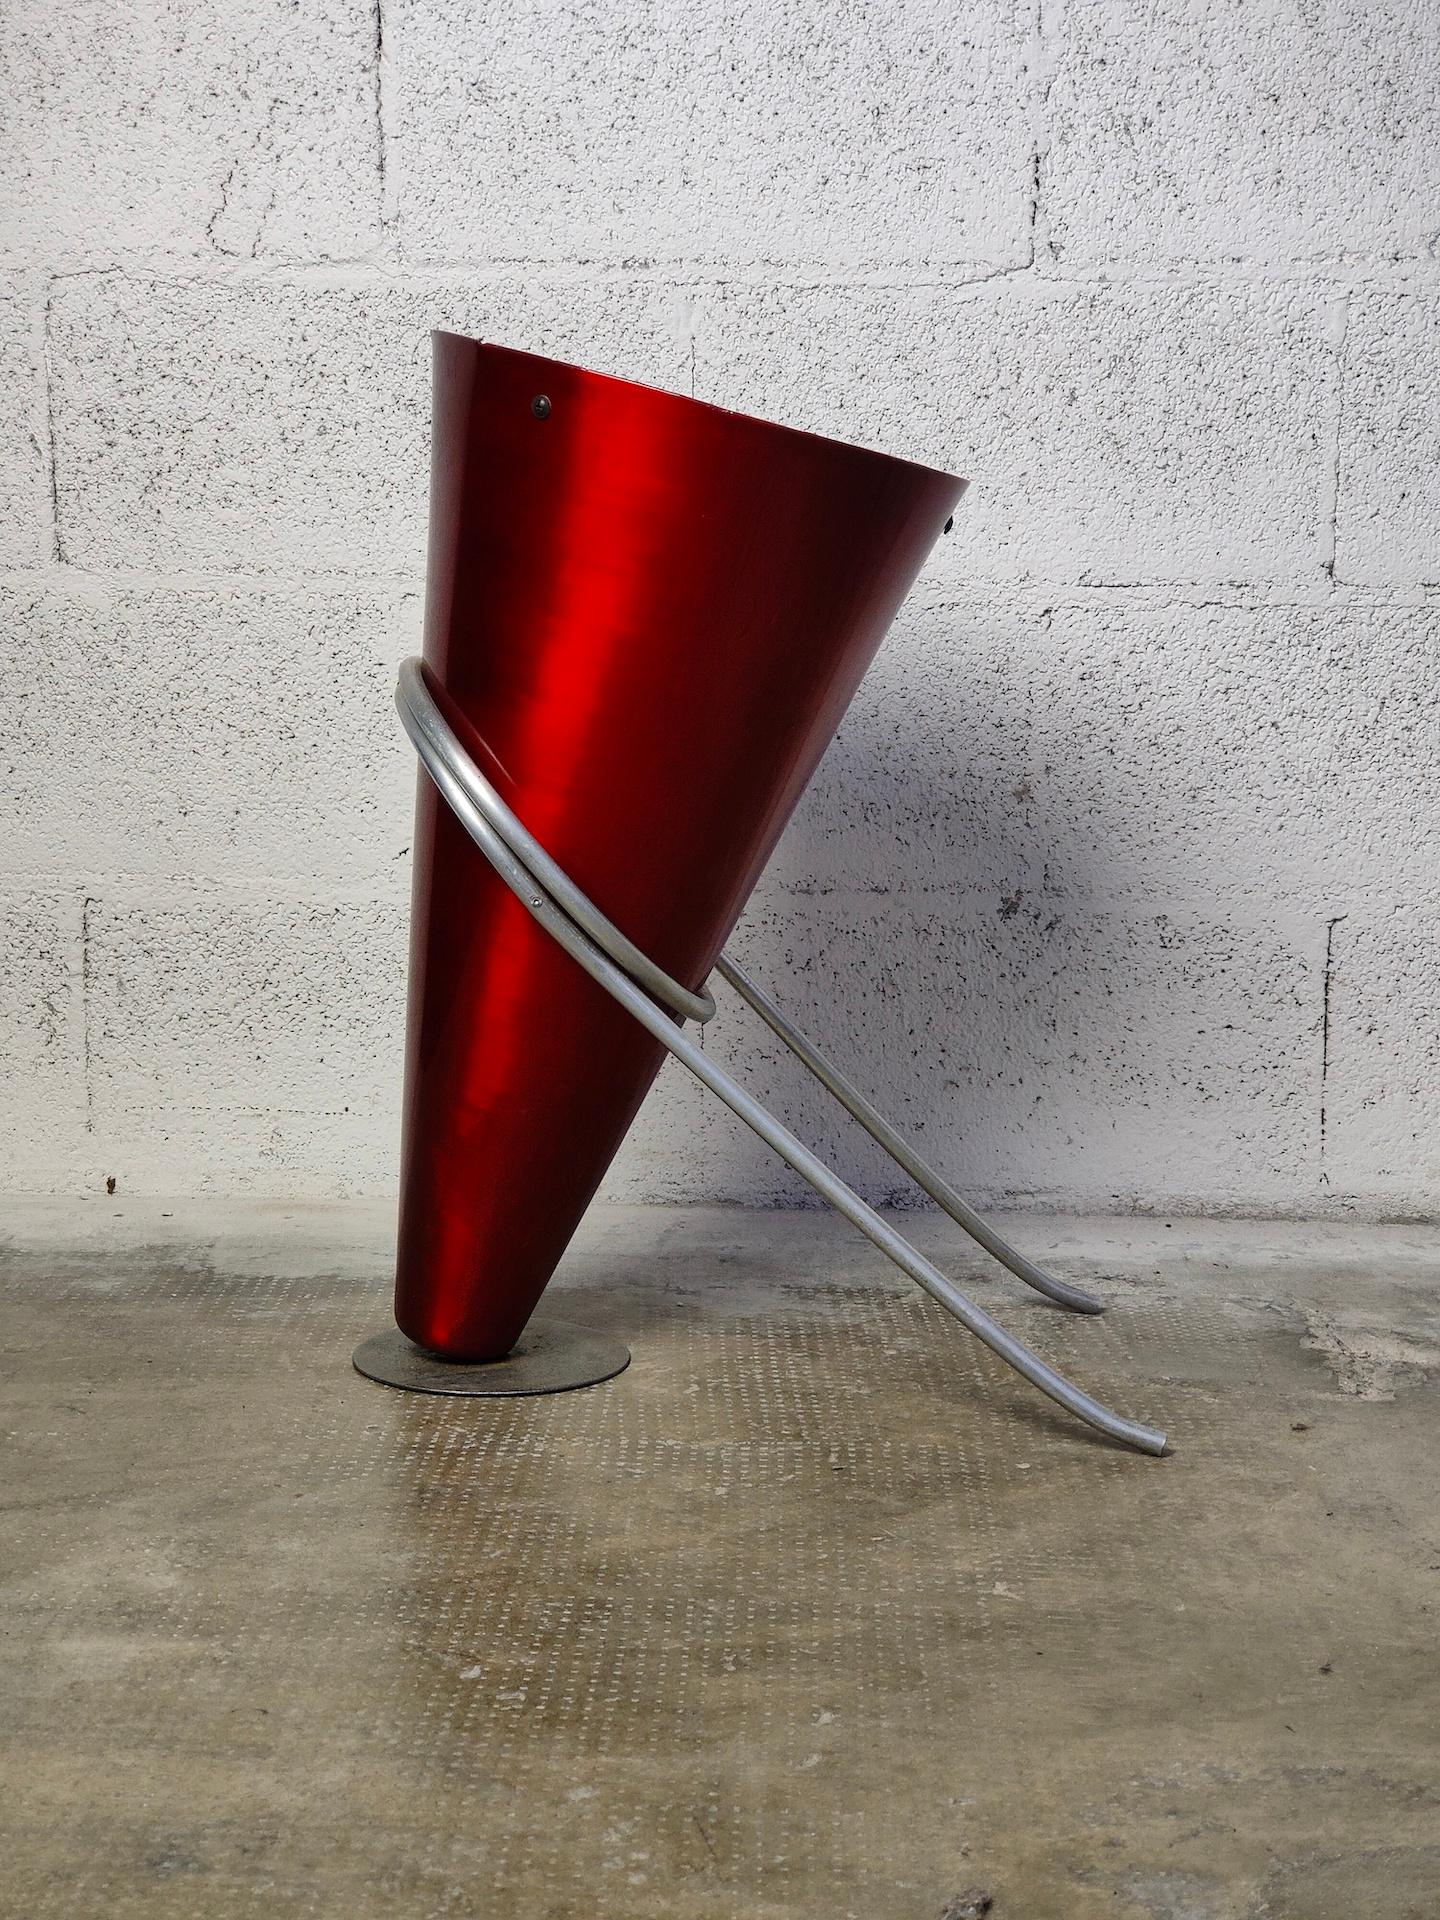 Umbrella stand designed by Ettore Sottsass and produced by the Rinnovel Metallurgical Industry in the 70s. Rare and famous object, passed through many important auctions in the sector. Made entirely of painted aluminum.
ETTORE SOTTSASS
(Innsbruck,